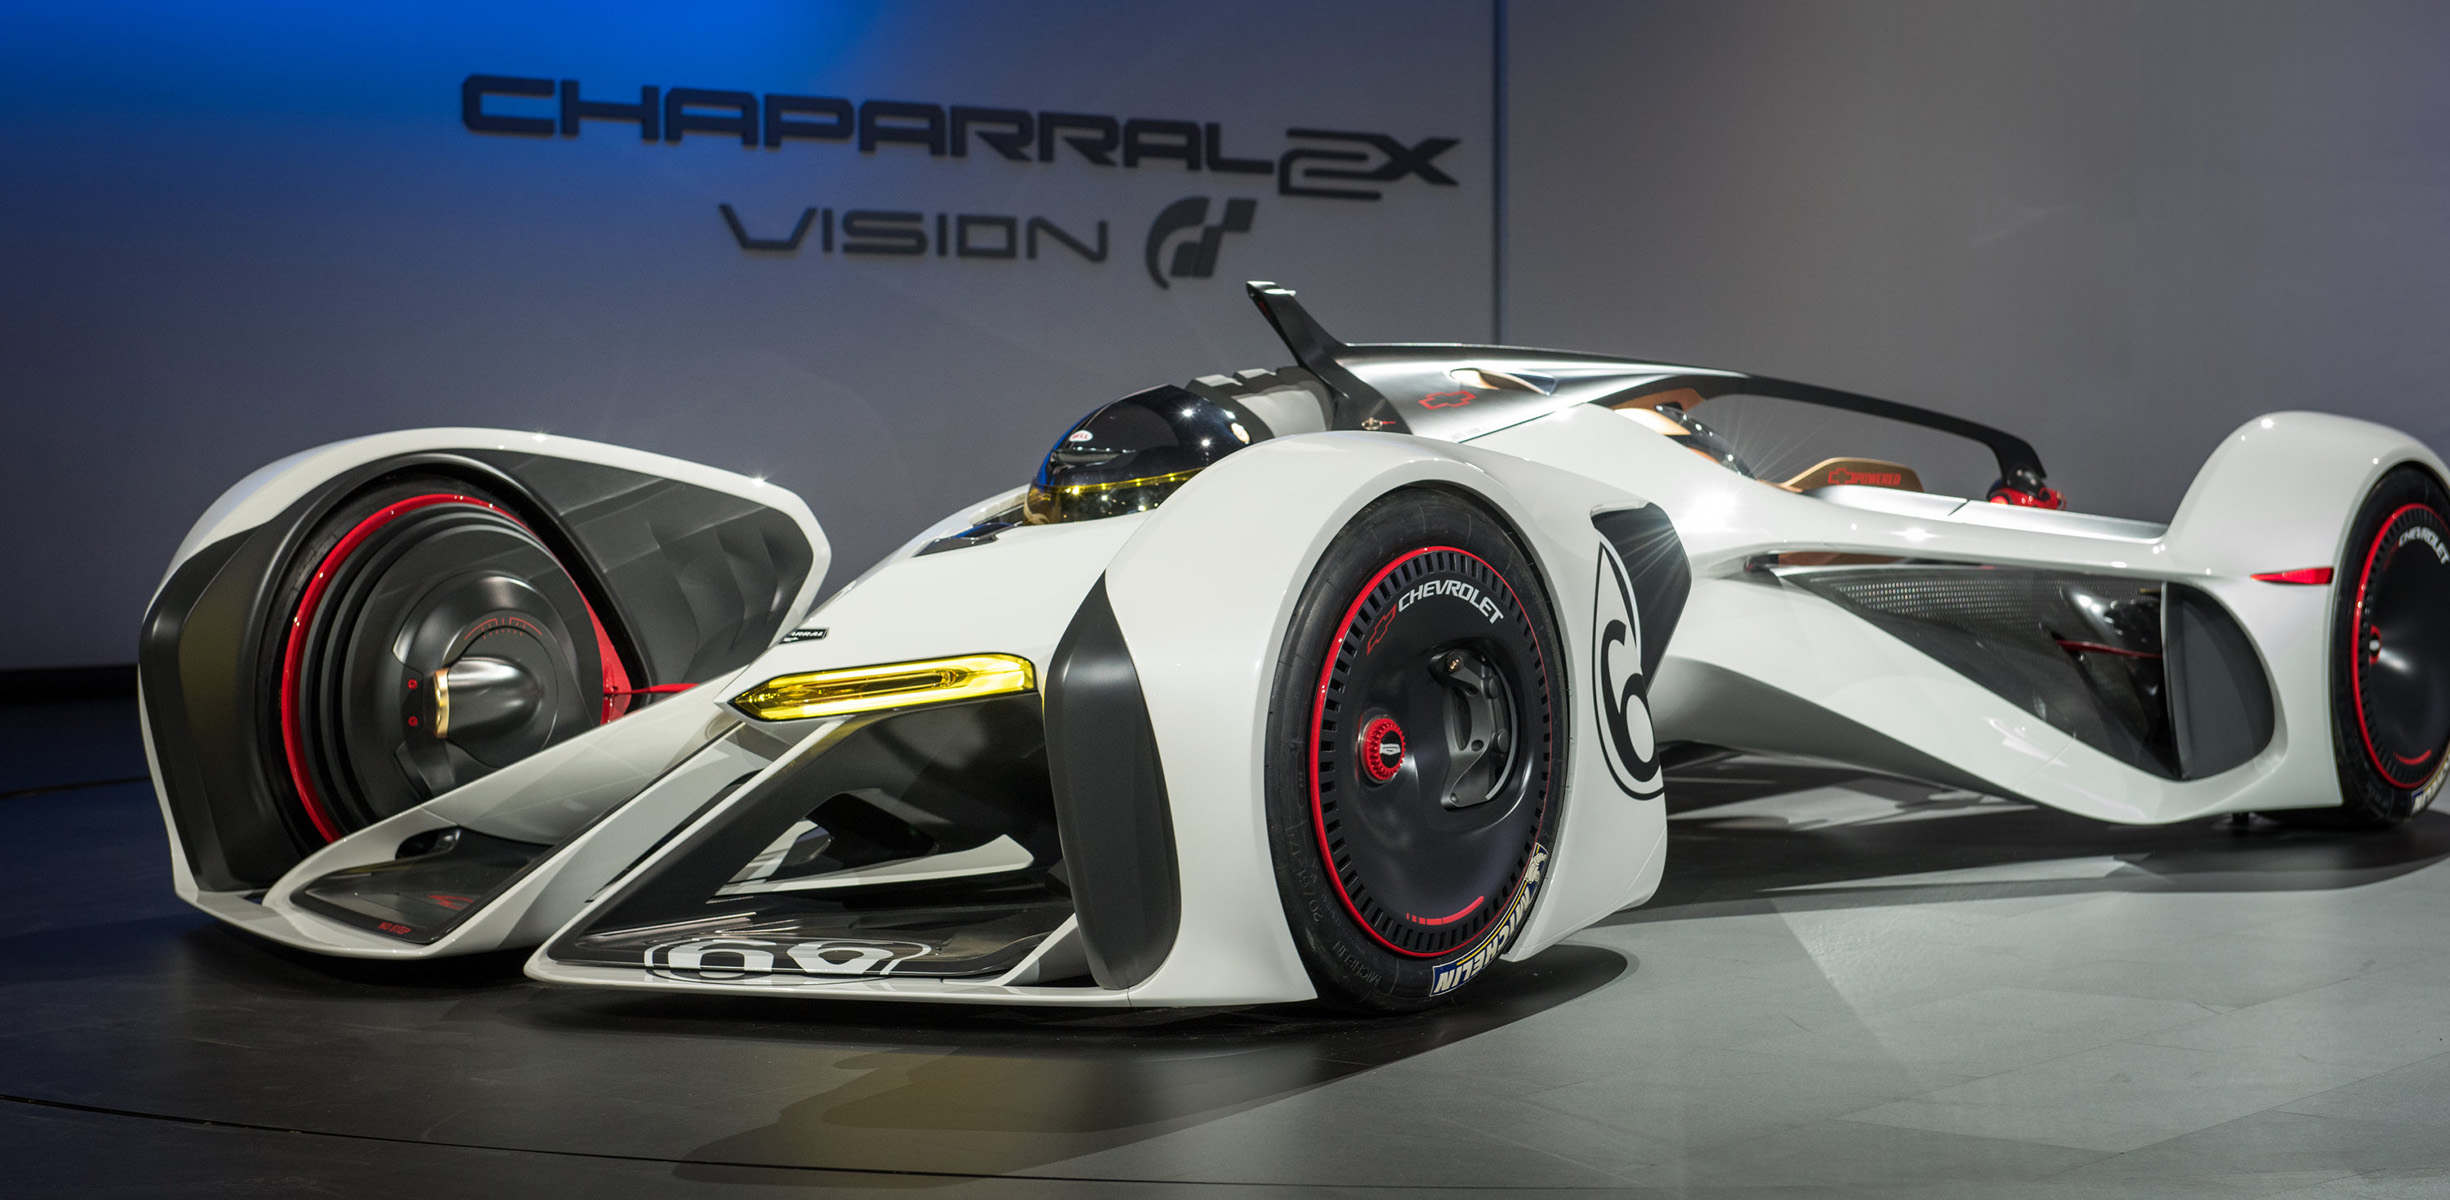 Chevrolet Chaparral 2X Vision Gran Turismo is powered by 